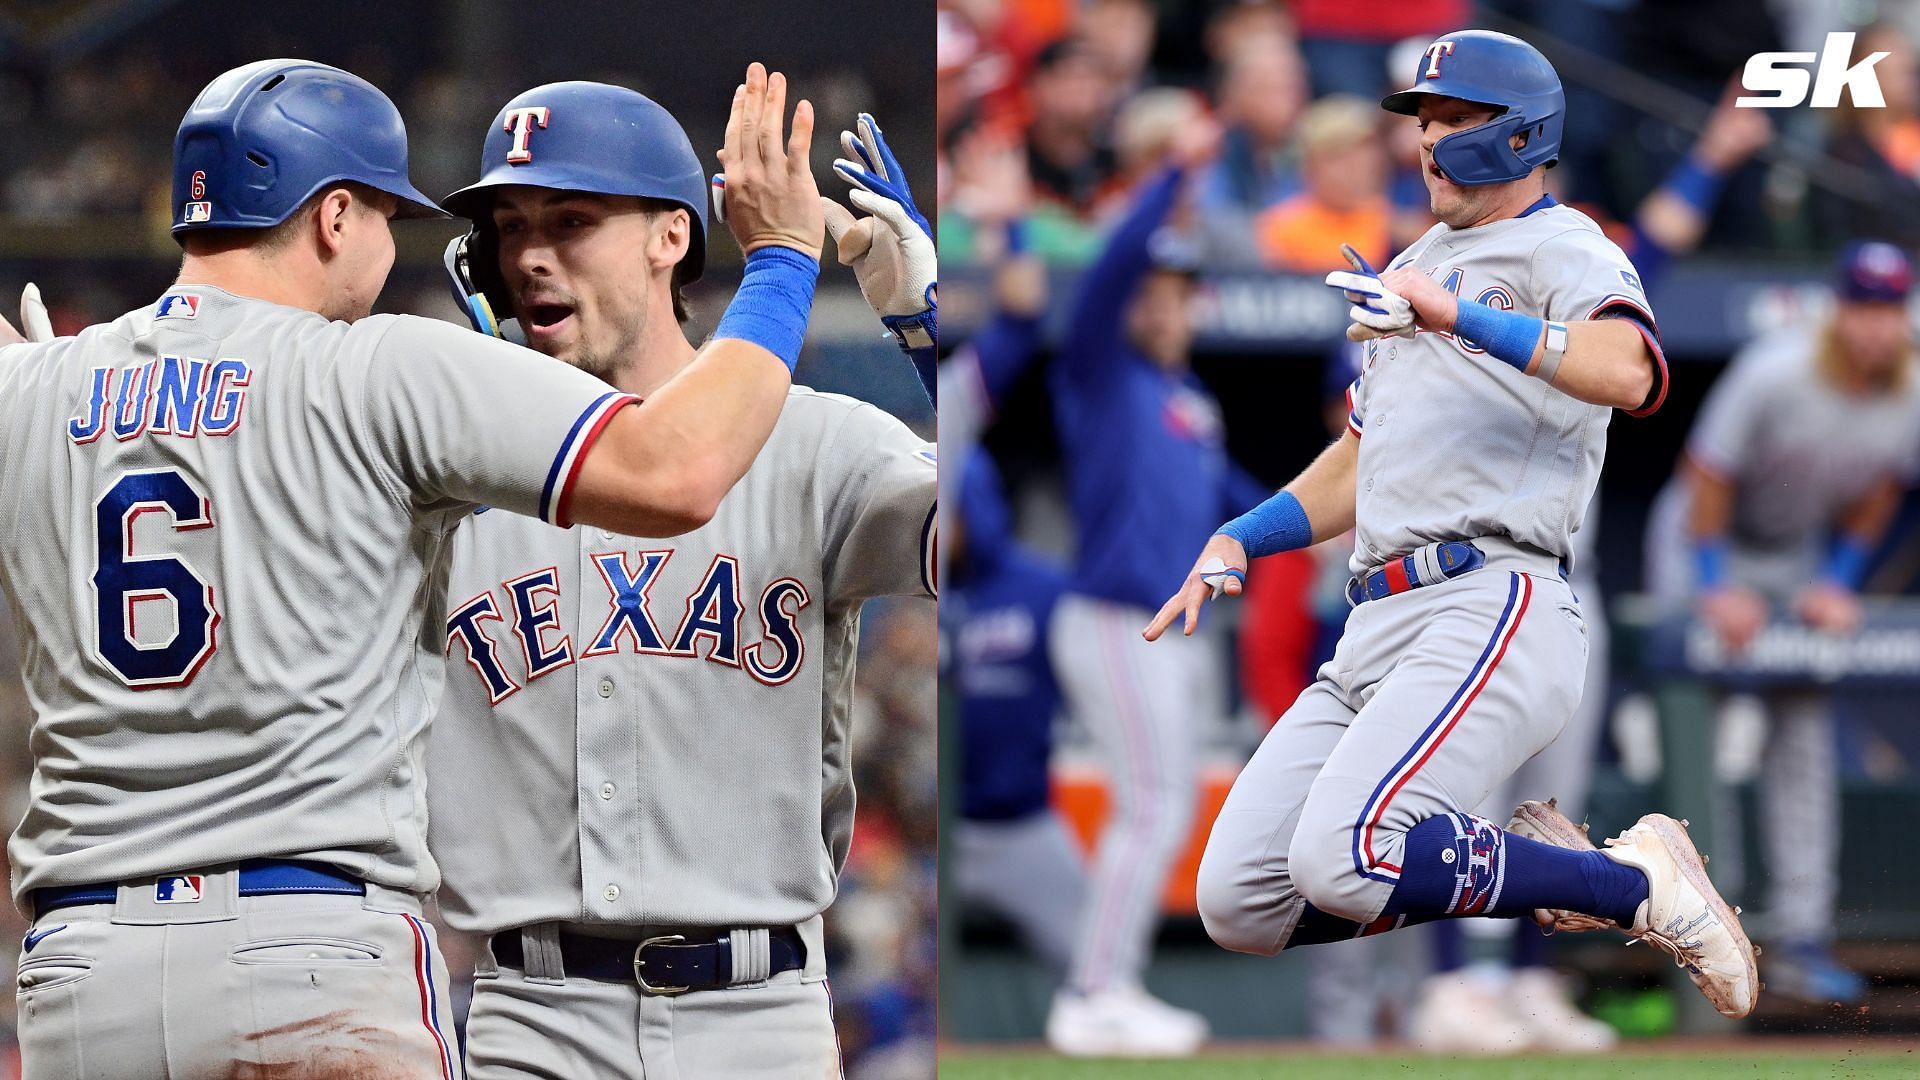 The Texas Rangers have stormed ahead to score five runs in a single inning against the O